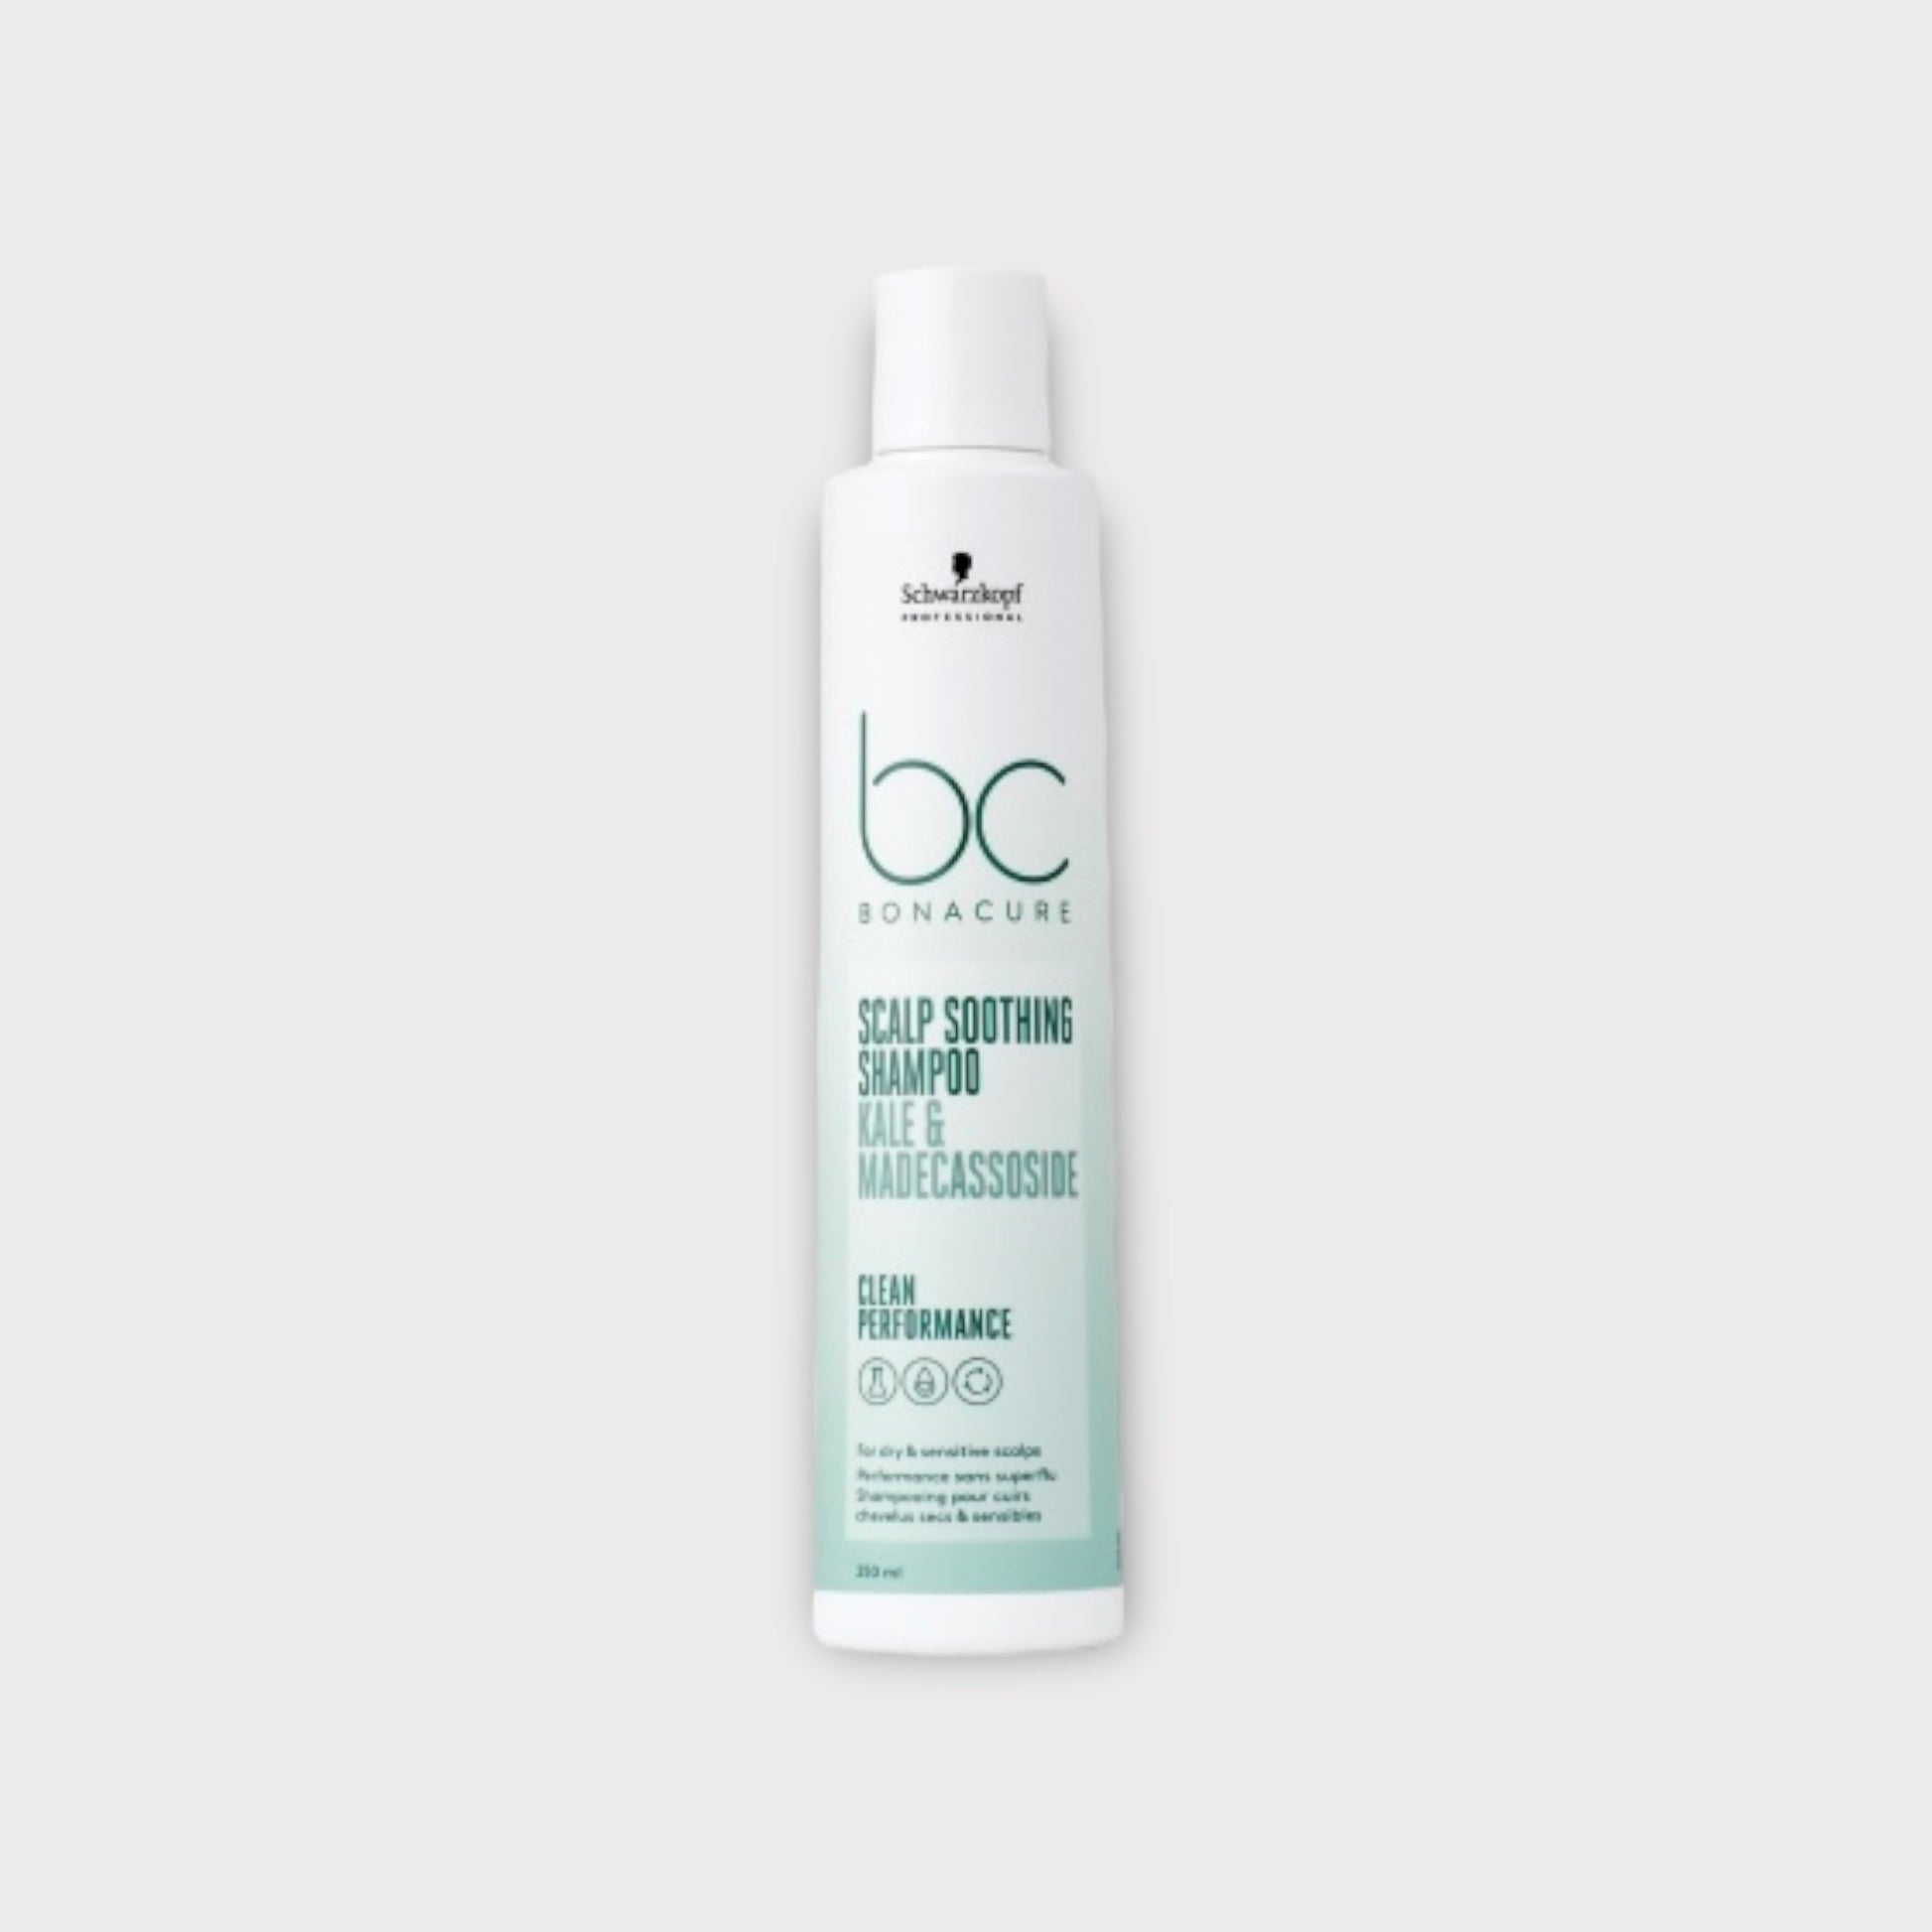 Bonacure Scalp Soothing Shampoo - 250 ml - Wash it Out